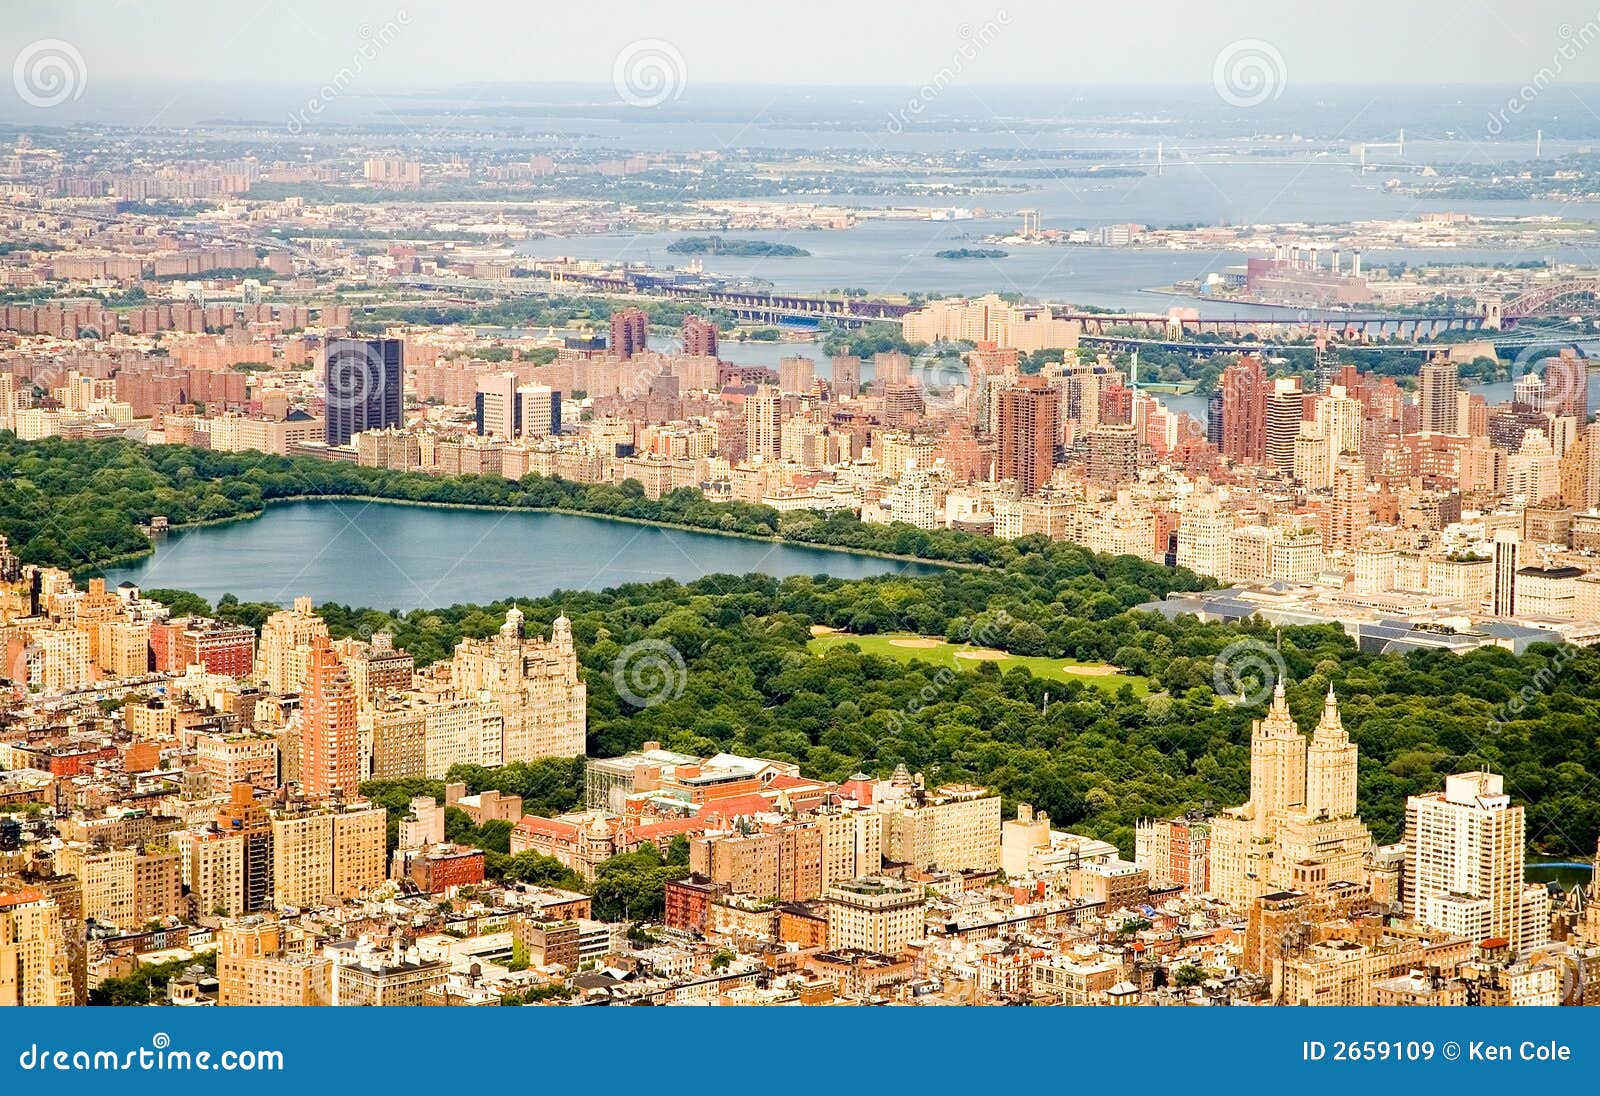 new york city and central park